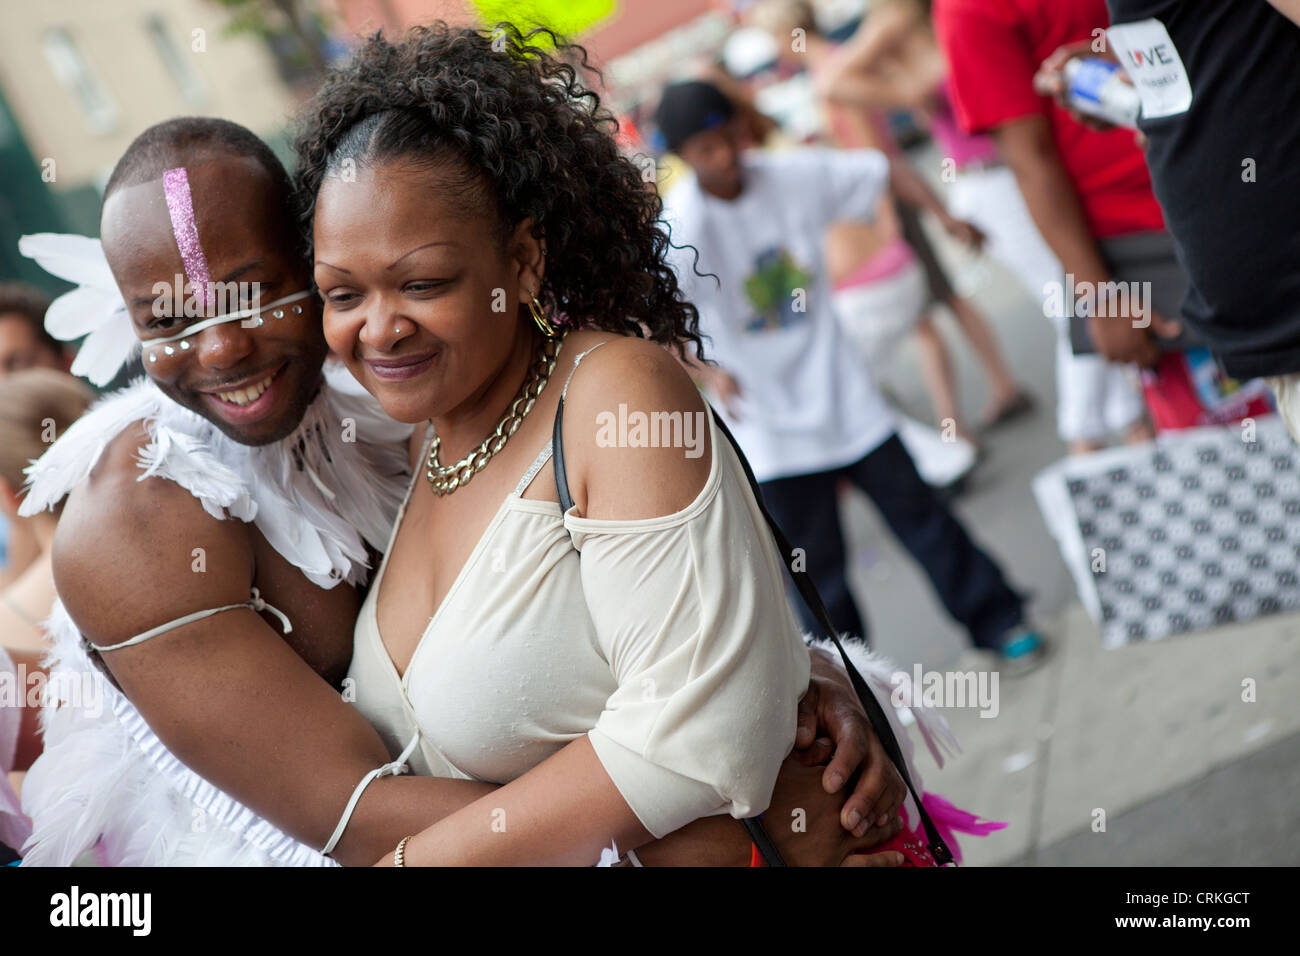 Black couple, gay pride, New York Banque D'Images